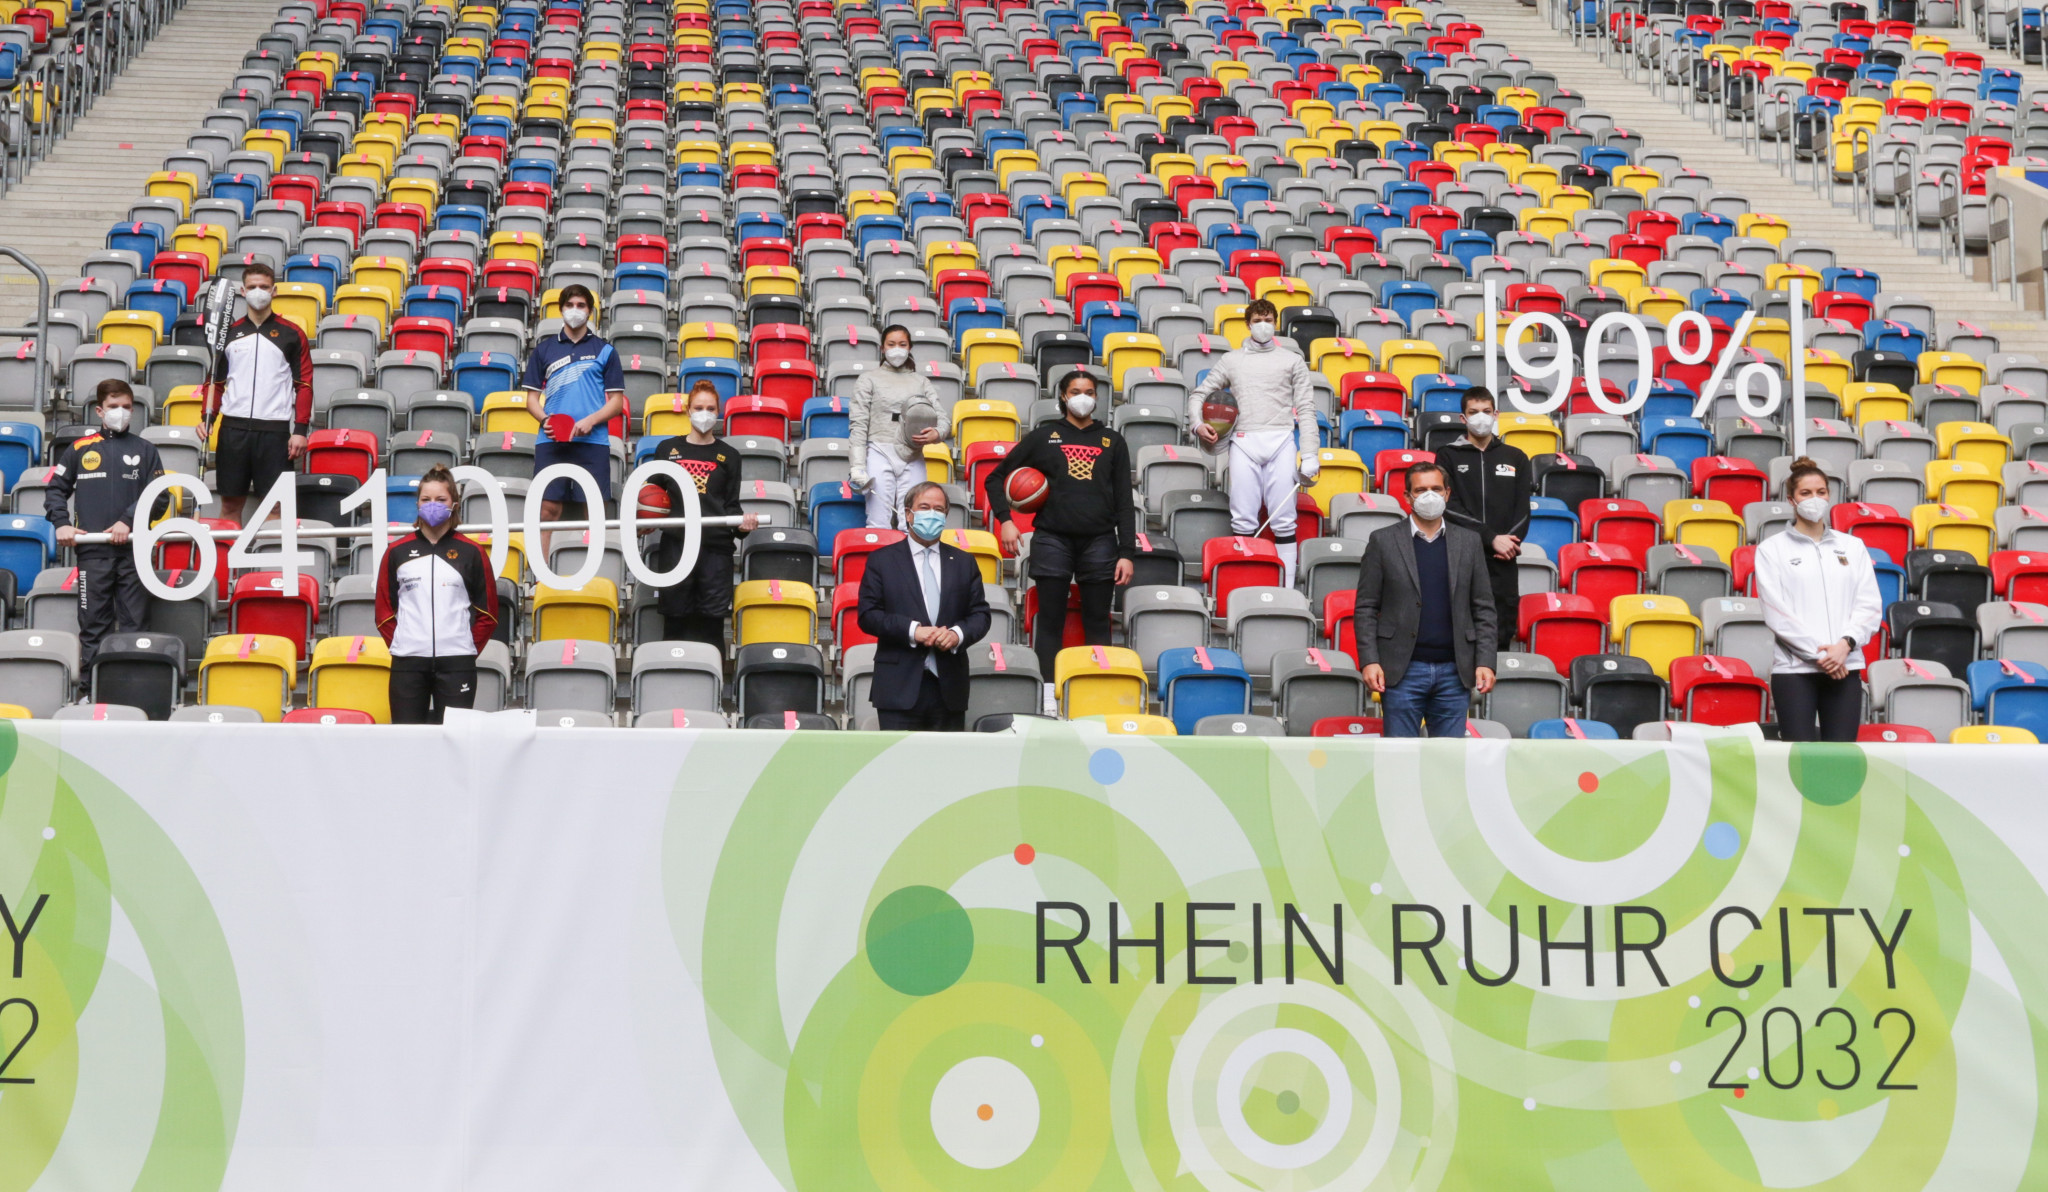 German officials unhappy over lack of transparency in 2032 Olympic bid process